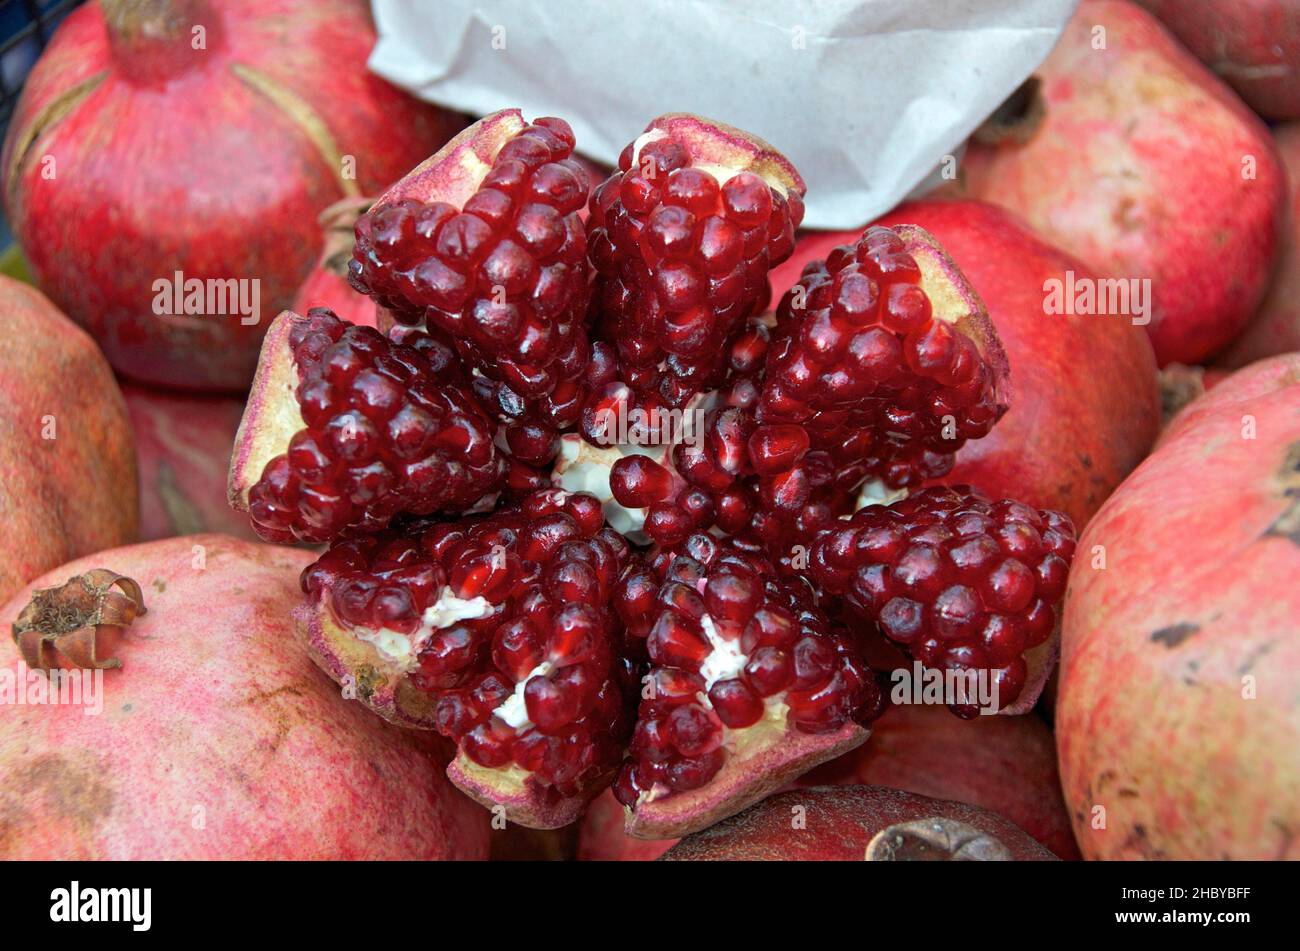 Ripe pomegranate cut open and star-shaped, pomegranates with fruit cut open Stock Photo